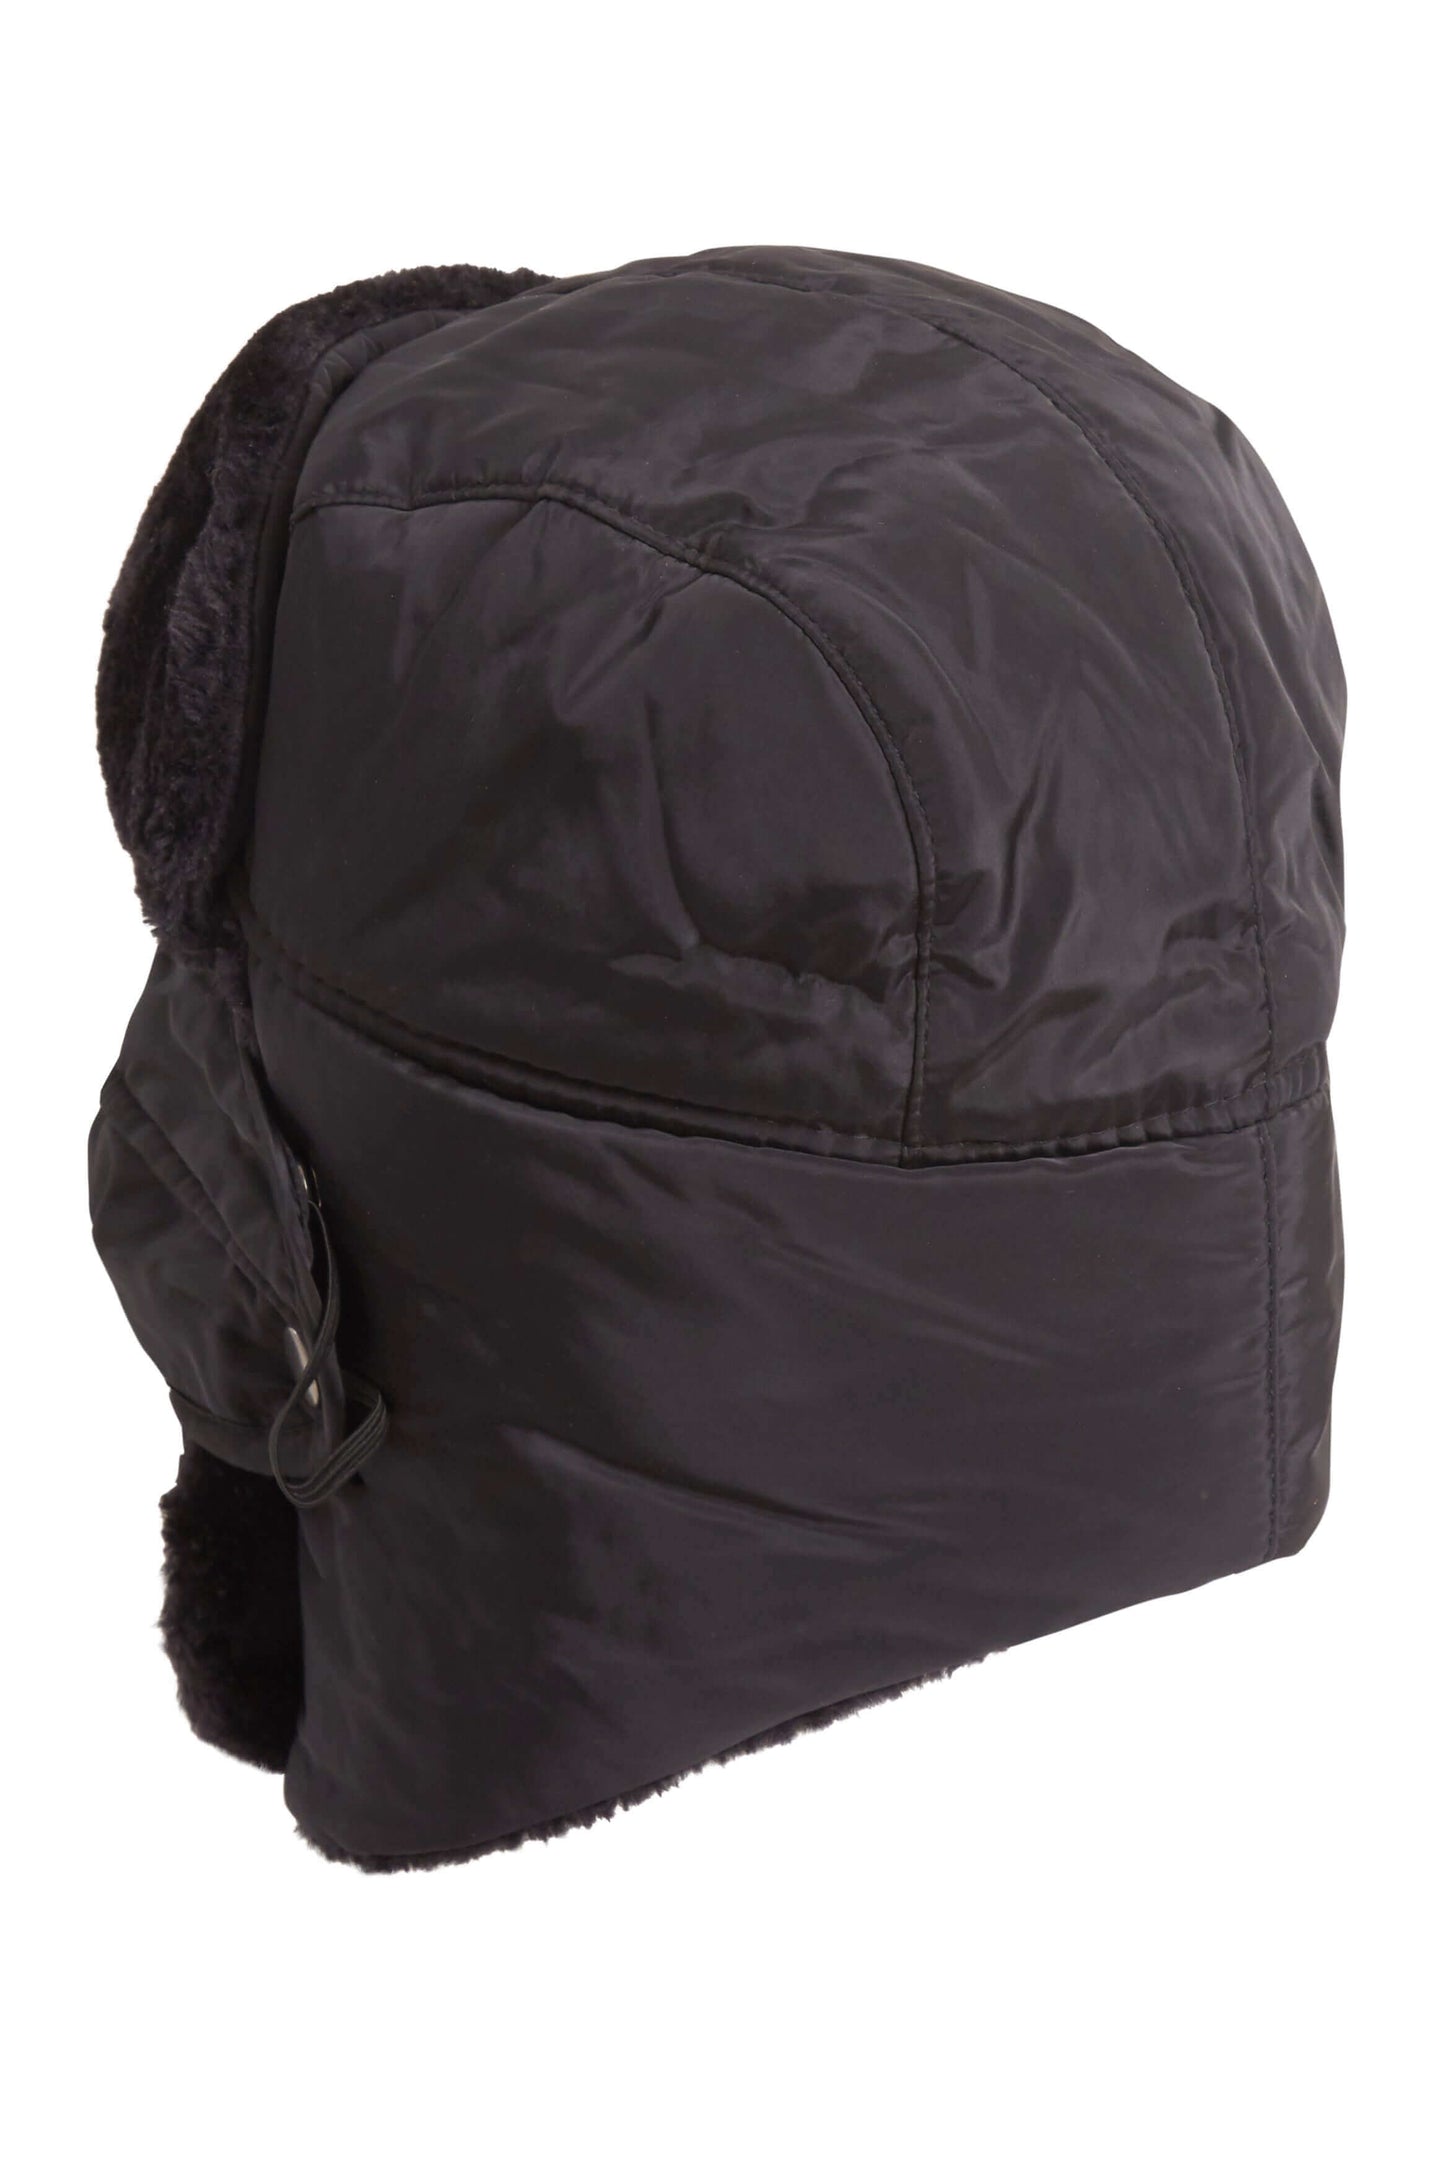 Versatile Winter Trapper Hat with Removable Face Cover Adjustable Ear Flaps Showerproof Fur Lined Ideal for Skiing Snowboarding Hiking by Heatwave Thermalwear. Buy now for £10.00. A Trapper Hat by Heatwave Thermalwear. _Hi_chtgptapp_optimised_this_descrip